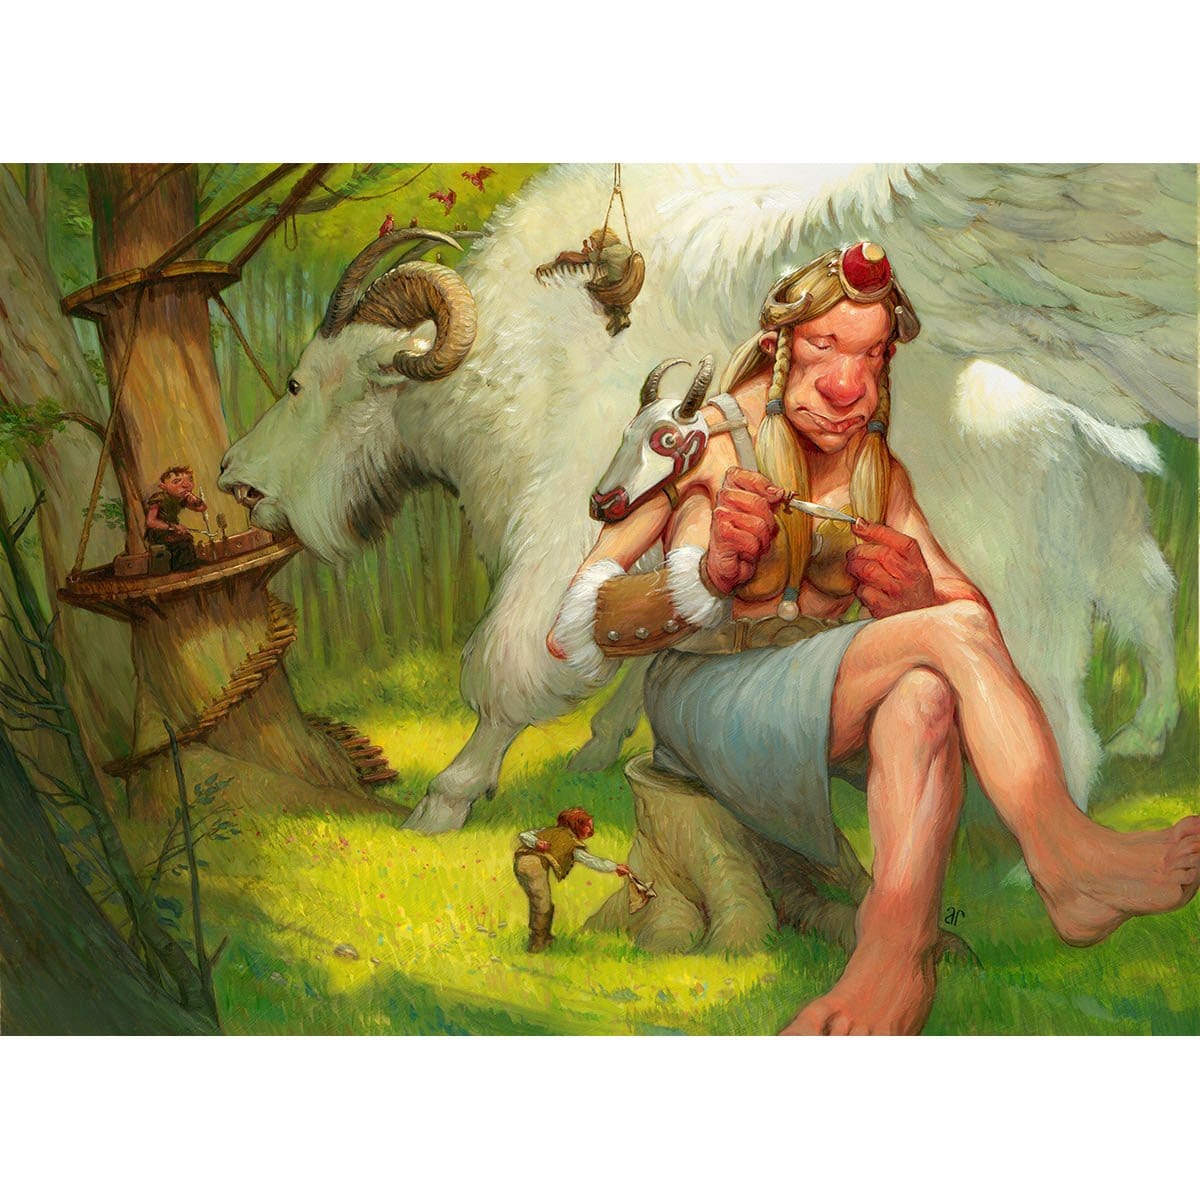 Cloudgoat Ranger Print - Print - Original Magic Art - Accessories for Magic the Gathering and other card games